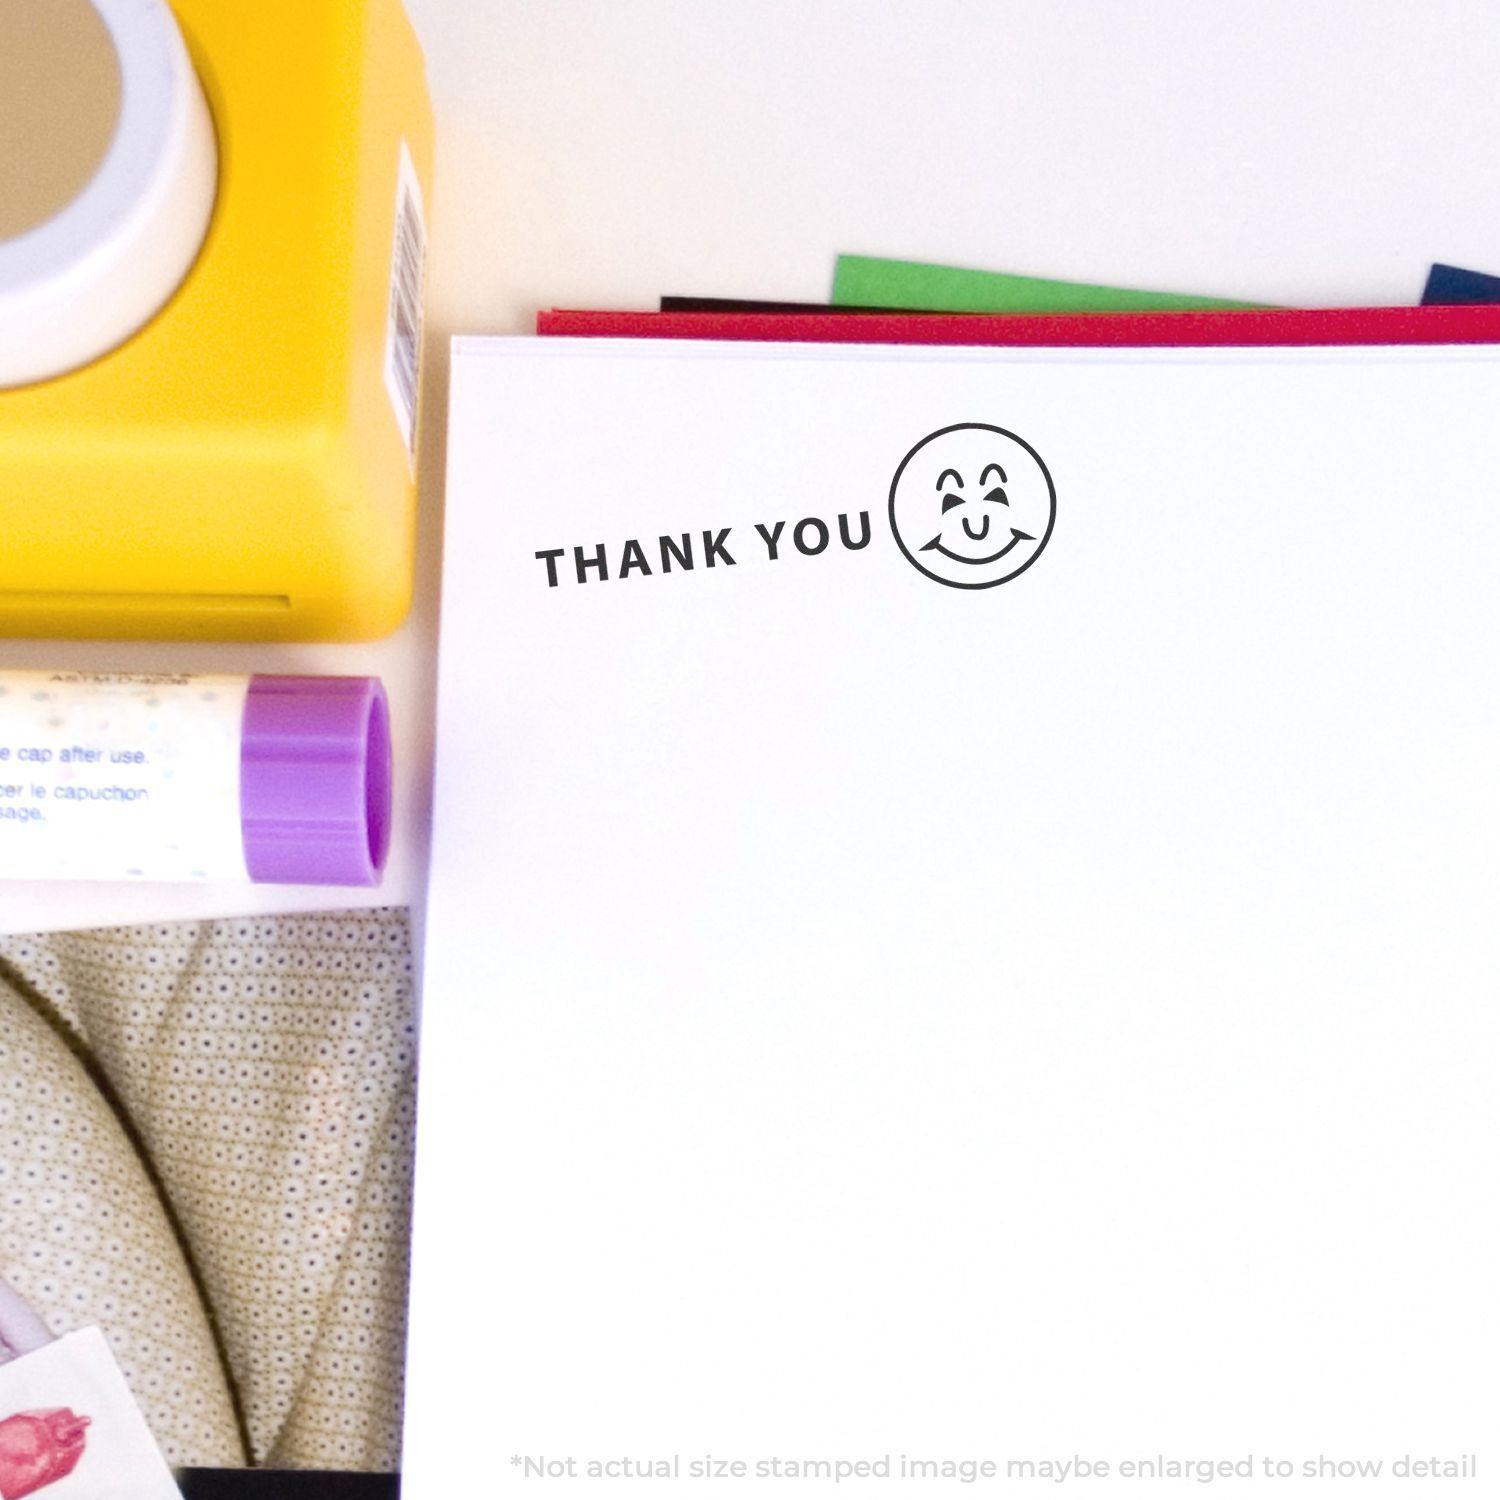 A stock office rubber stamp with a stamped image showing how the text "THANK YOU" in a large font with a smiley icon on the right side is displayed after stamping.